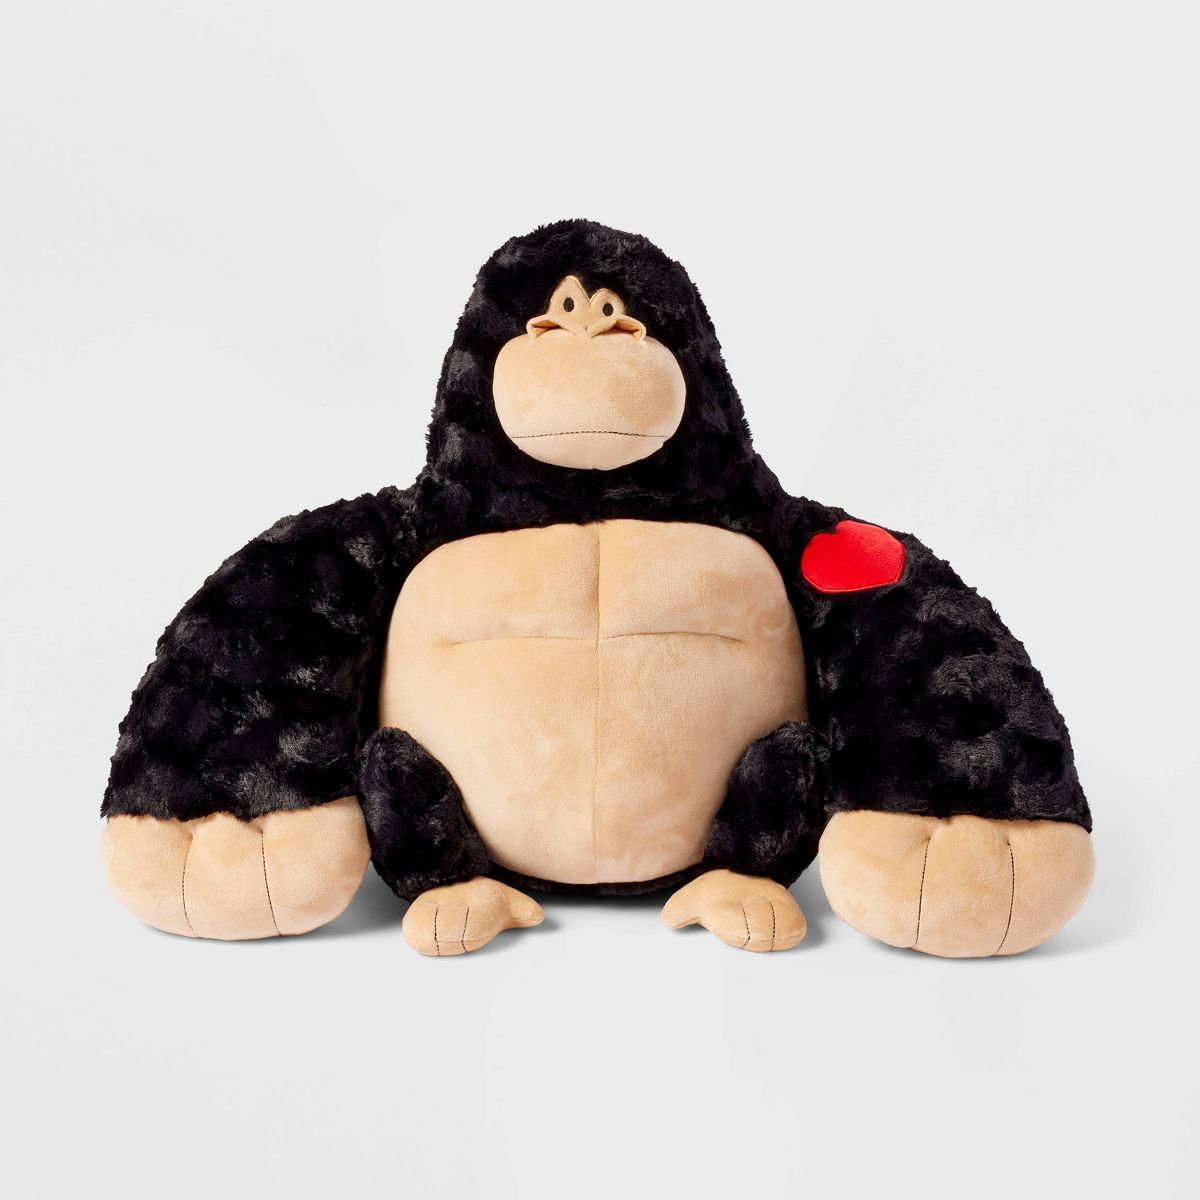 18'' Gorilla Stuffed Animal with Heart Accent - Gigglescape™ | Target